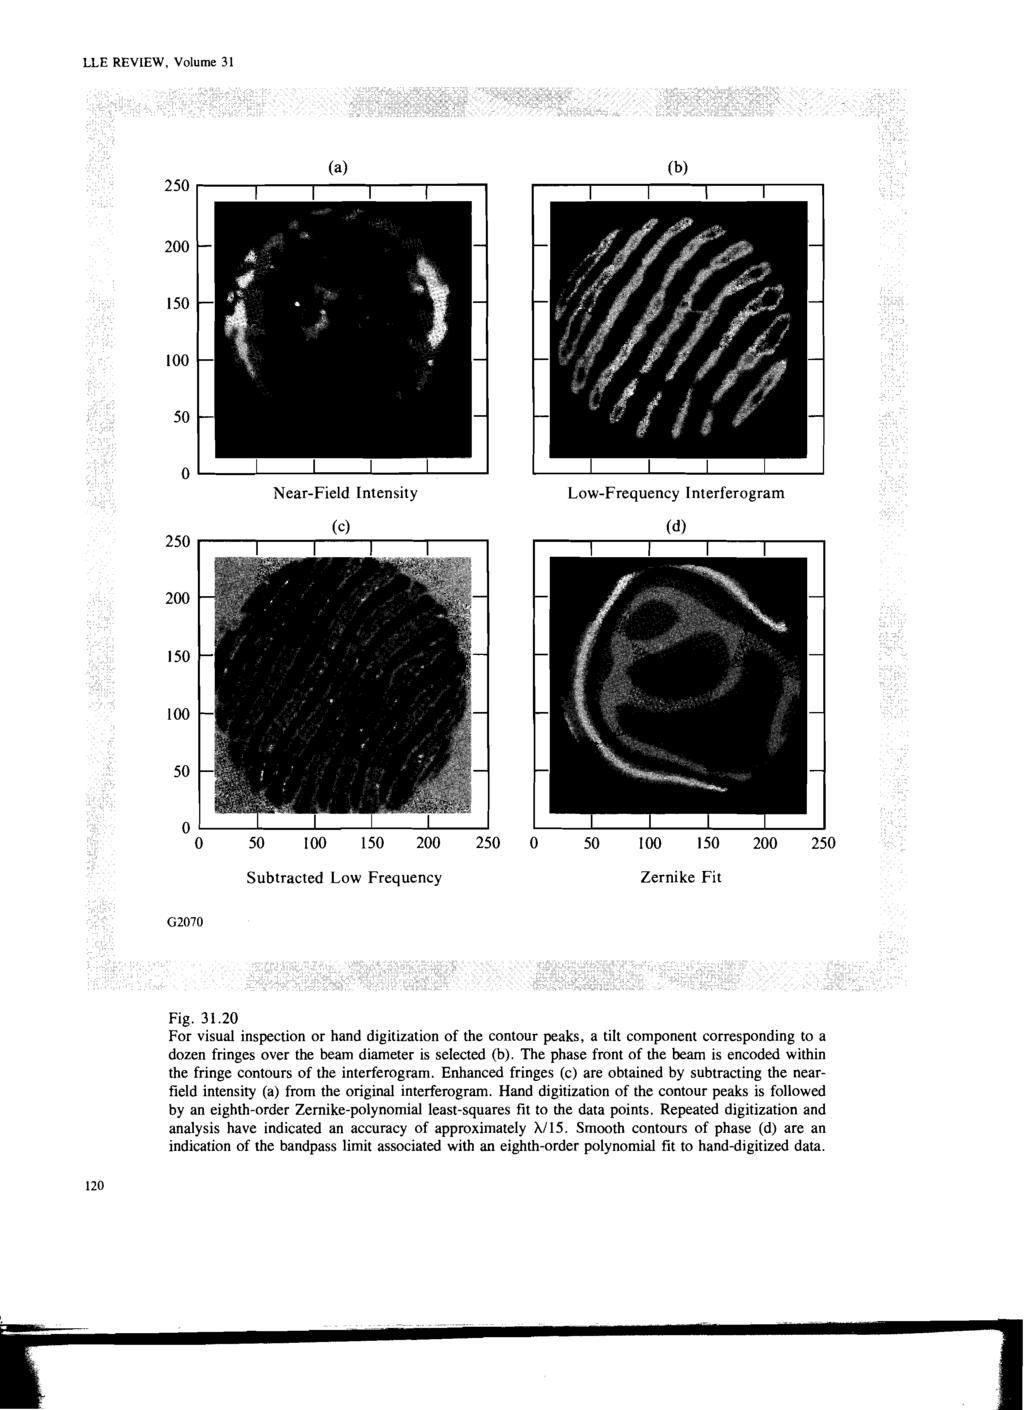 LLE REVIEW, Volume 31 Low-Frequency Interferogram 0 50 100 150 200 250 Subtracted Low Frequency 100 150 Zernike Fit Fig. 31.20 For visual inspection or hand digitization of the contour peaks, a tilt component corresponding to a dozen fringes over the beam diameter is selected (b).